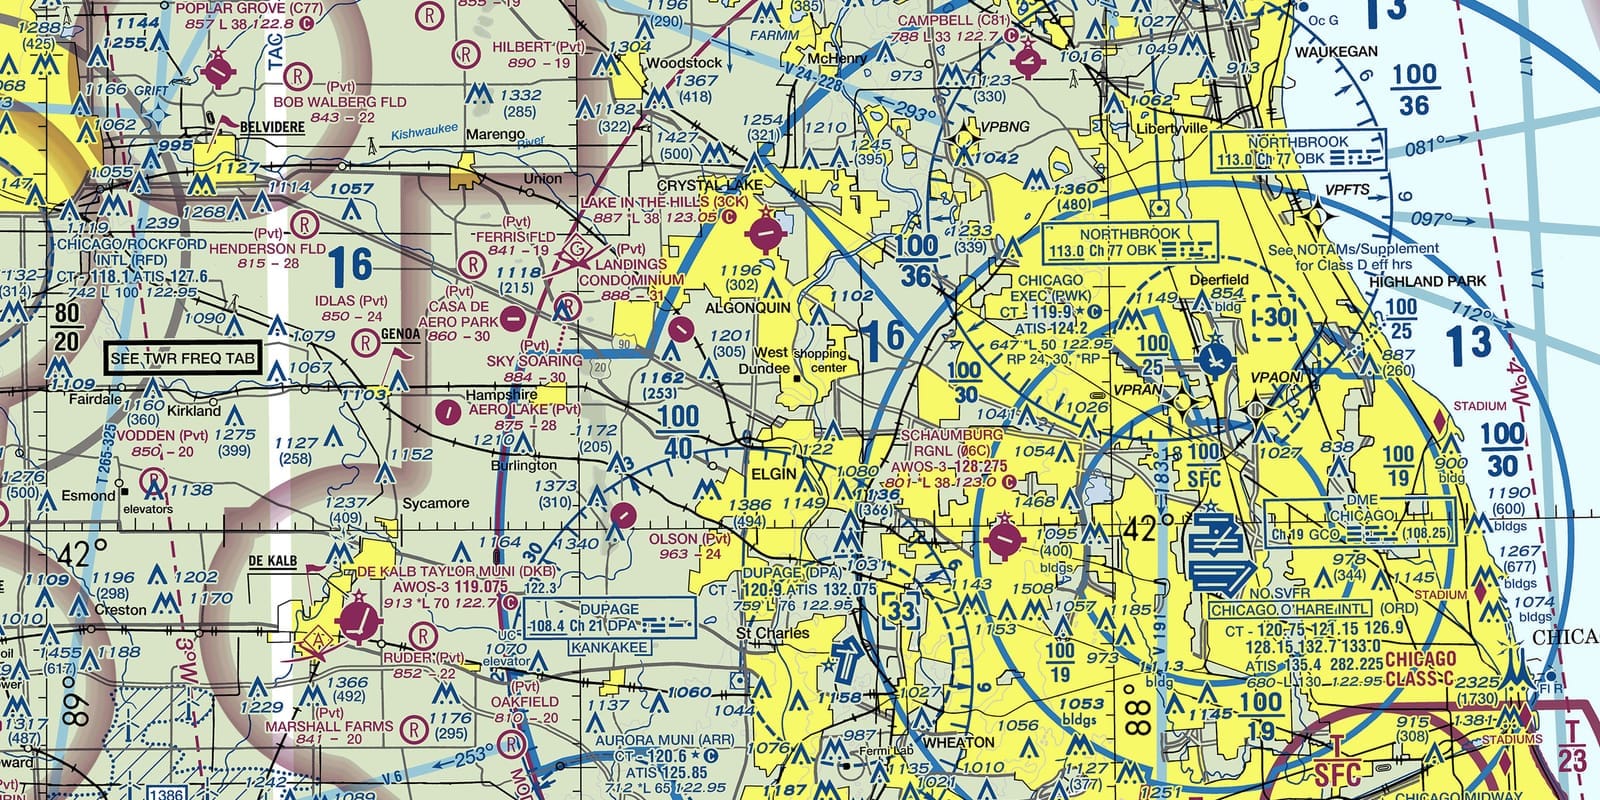 A detail of the Chicago O'Hare International Airport on the Chicago section VFR map. Source: FAA.